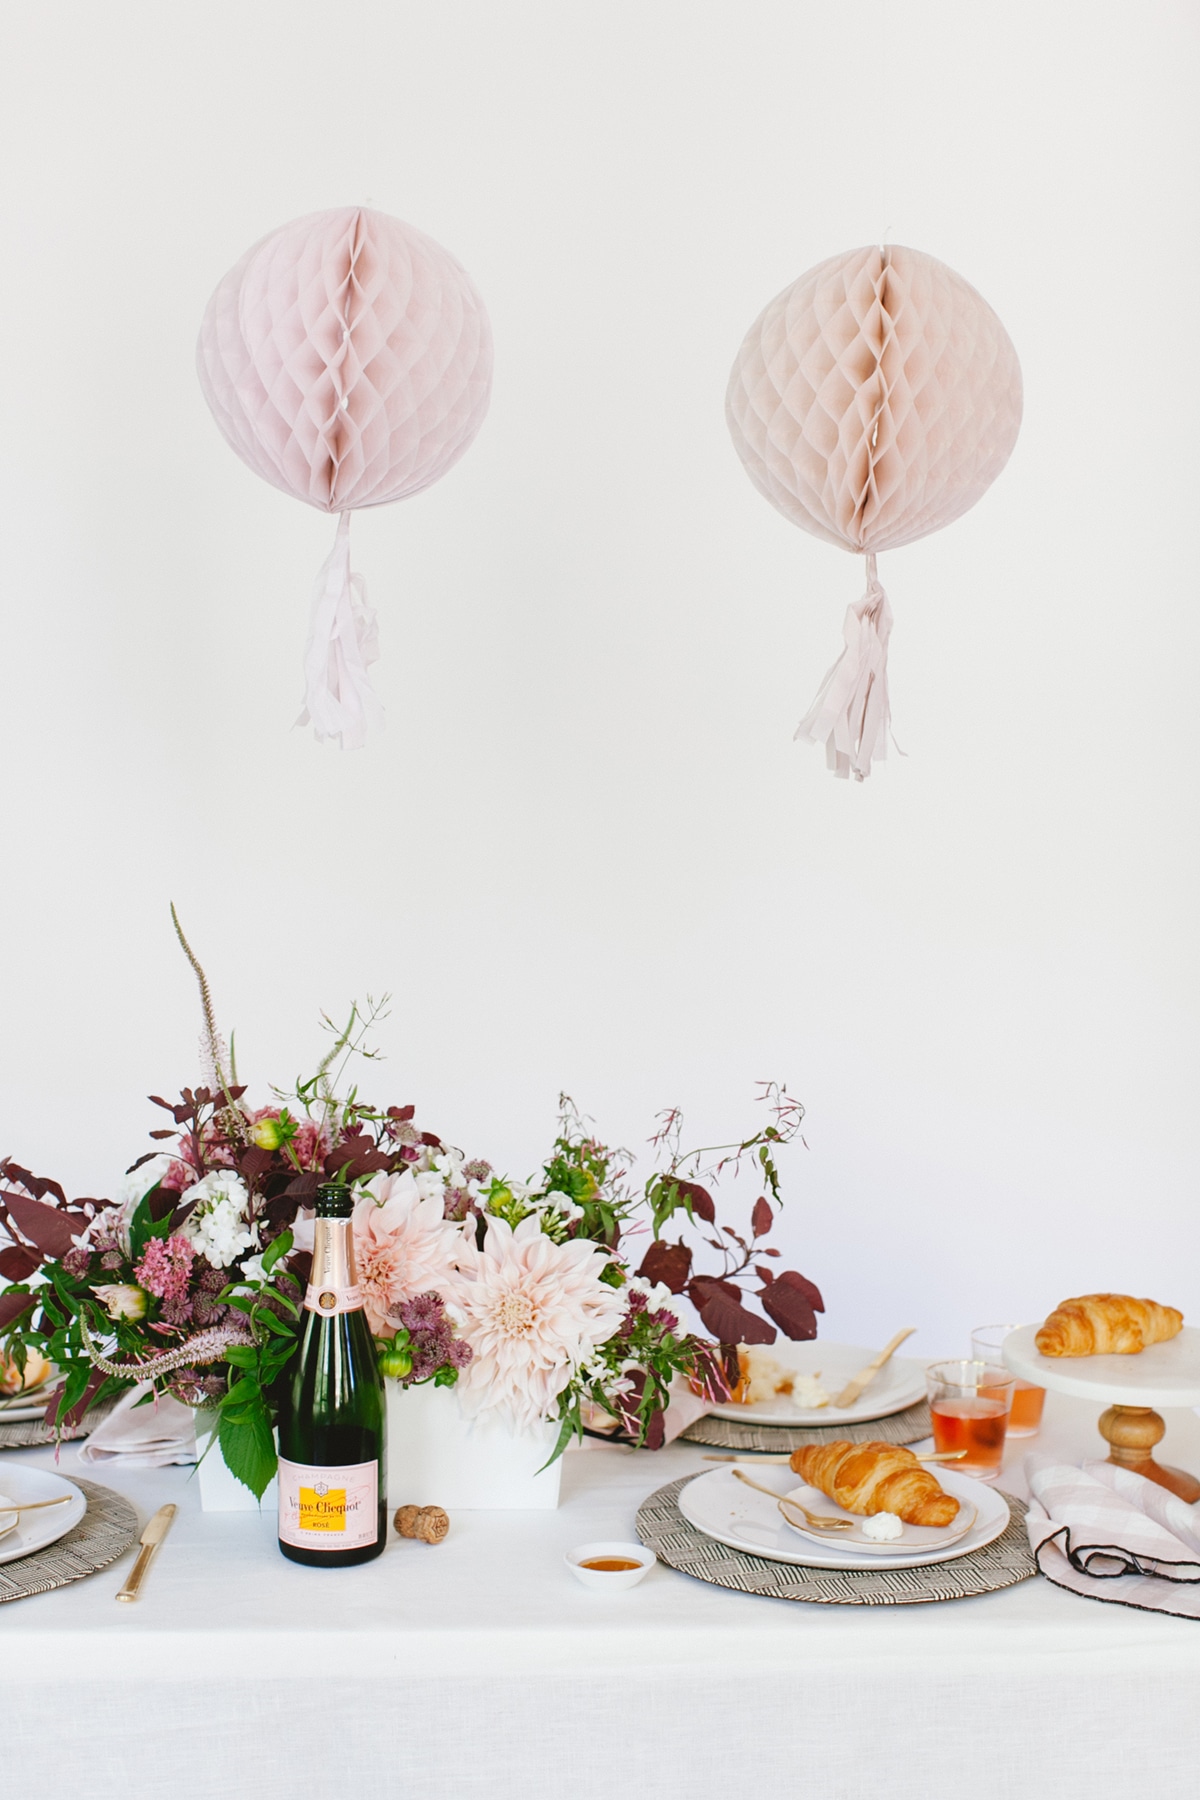 keeping things simple for a bridesmaid brunch | coco kelley wedding